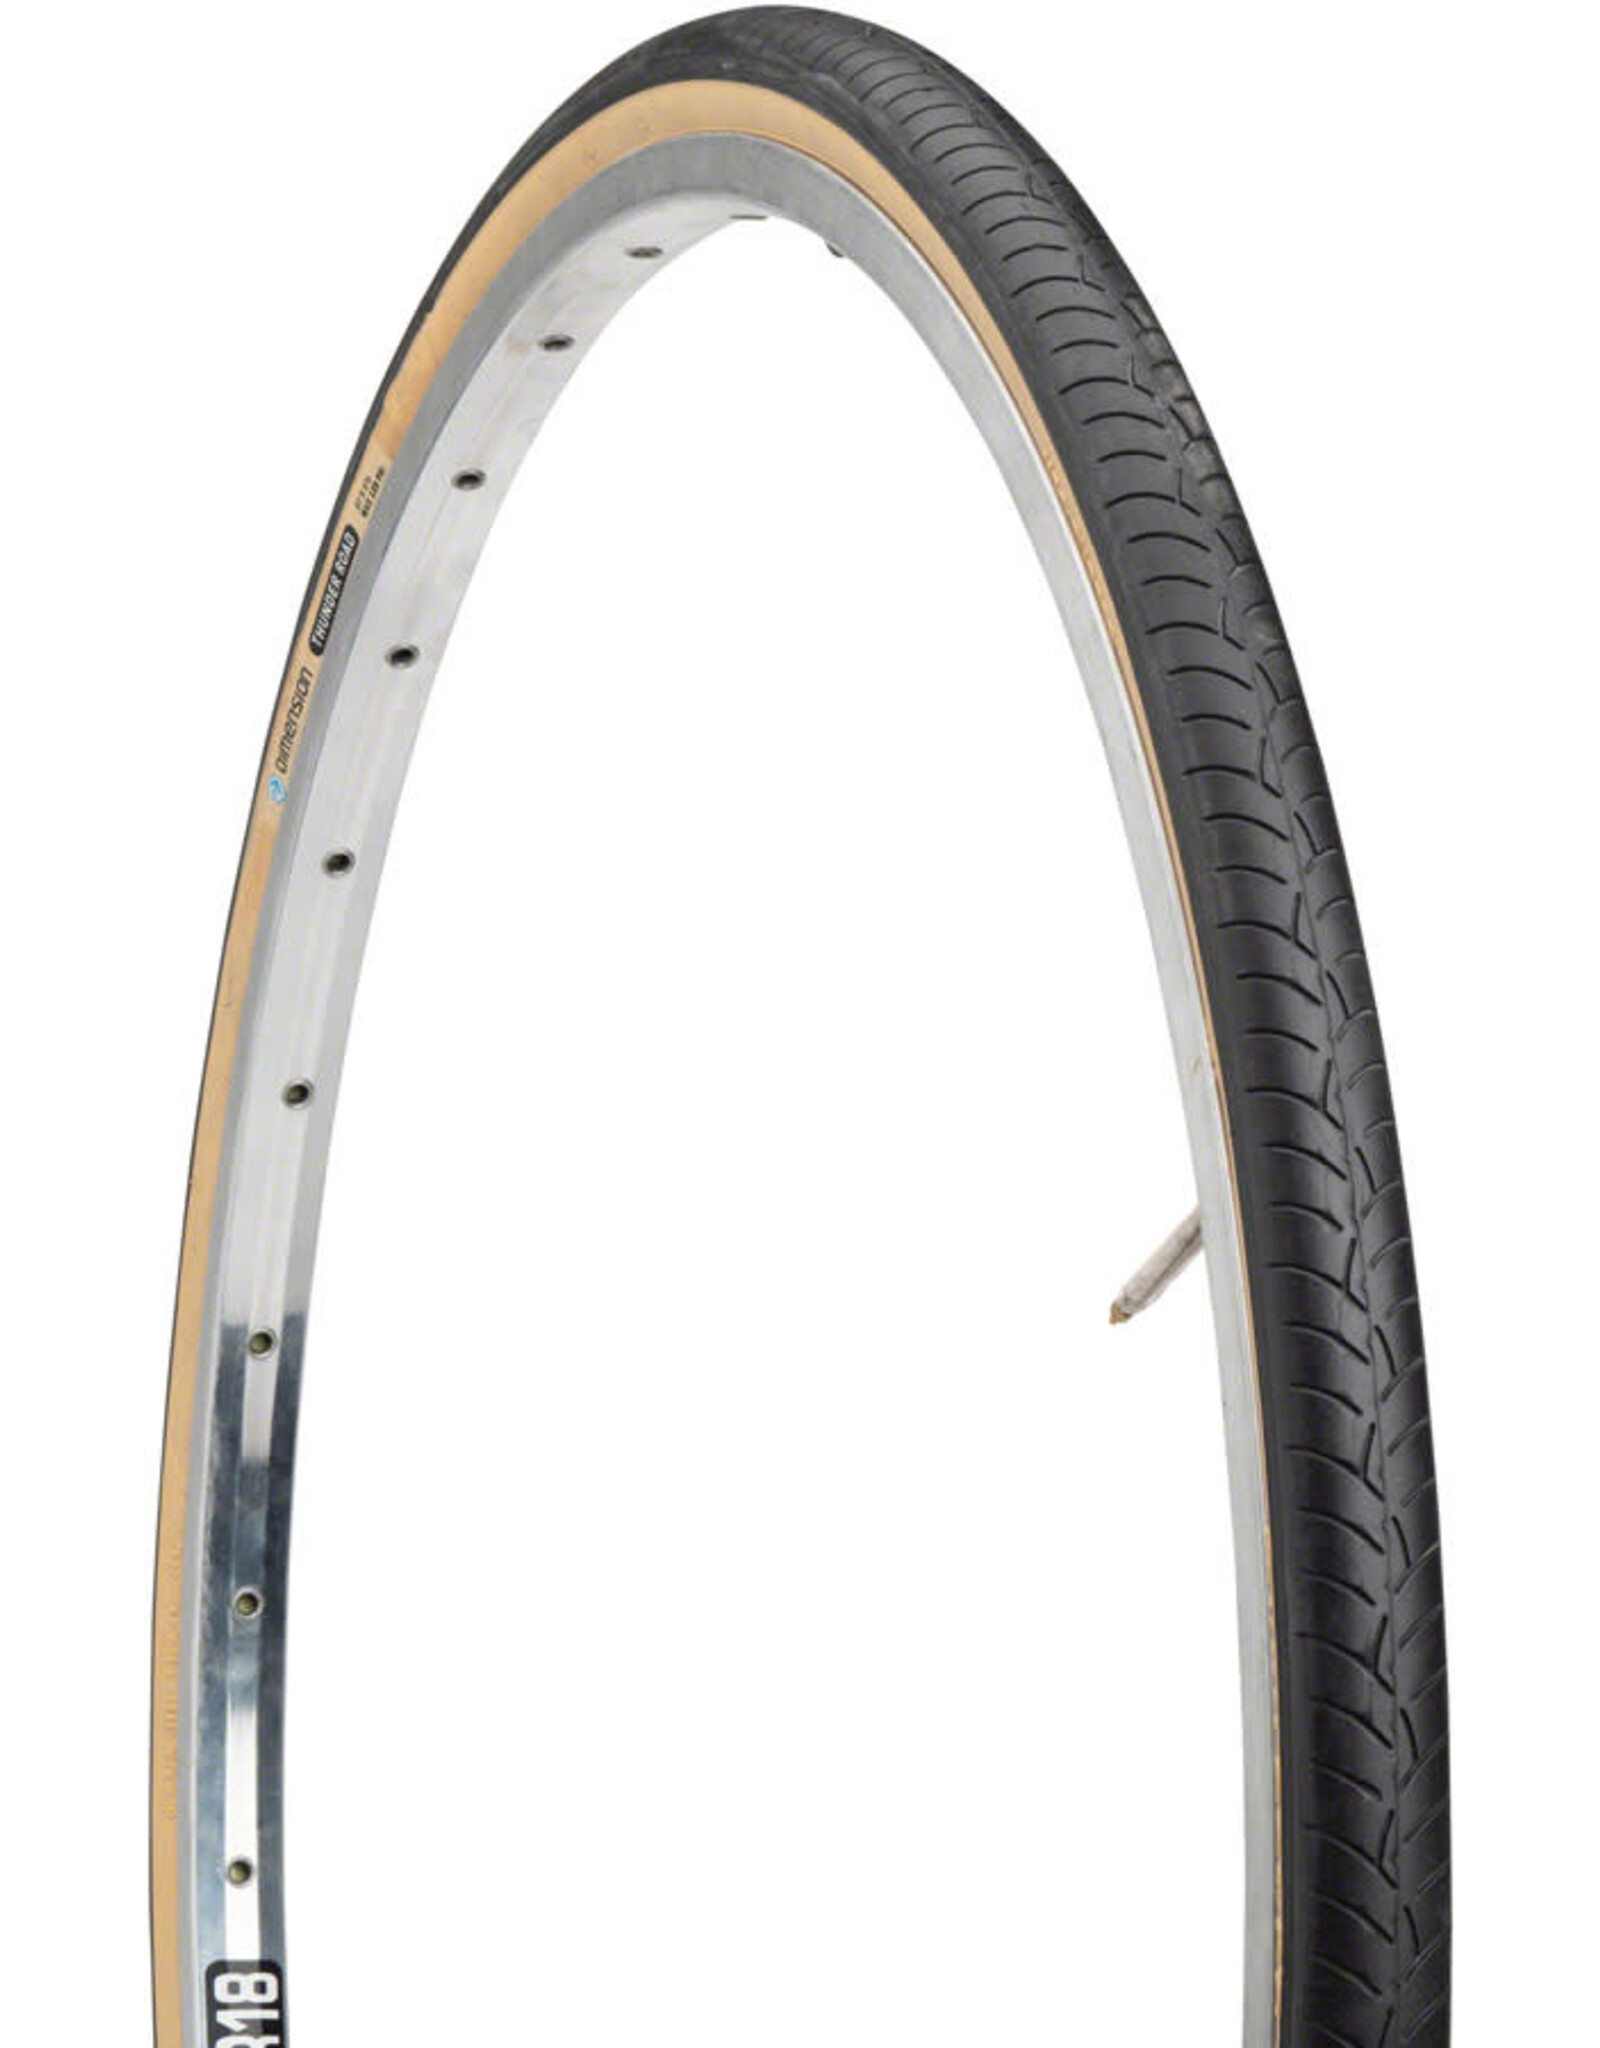 MSW MSW Thunder Road Tire  27 x 1-1/4 Tan Wall